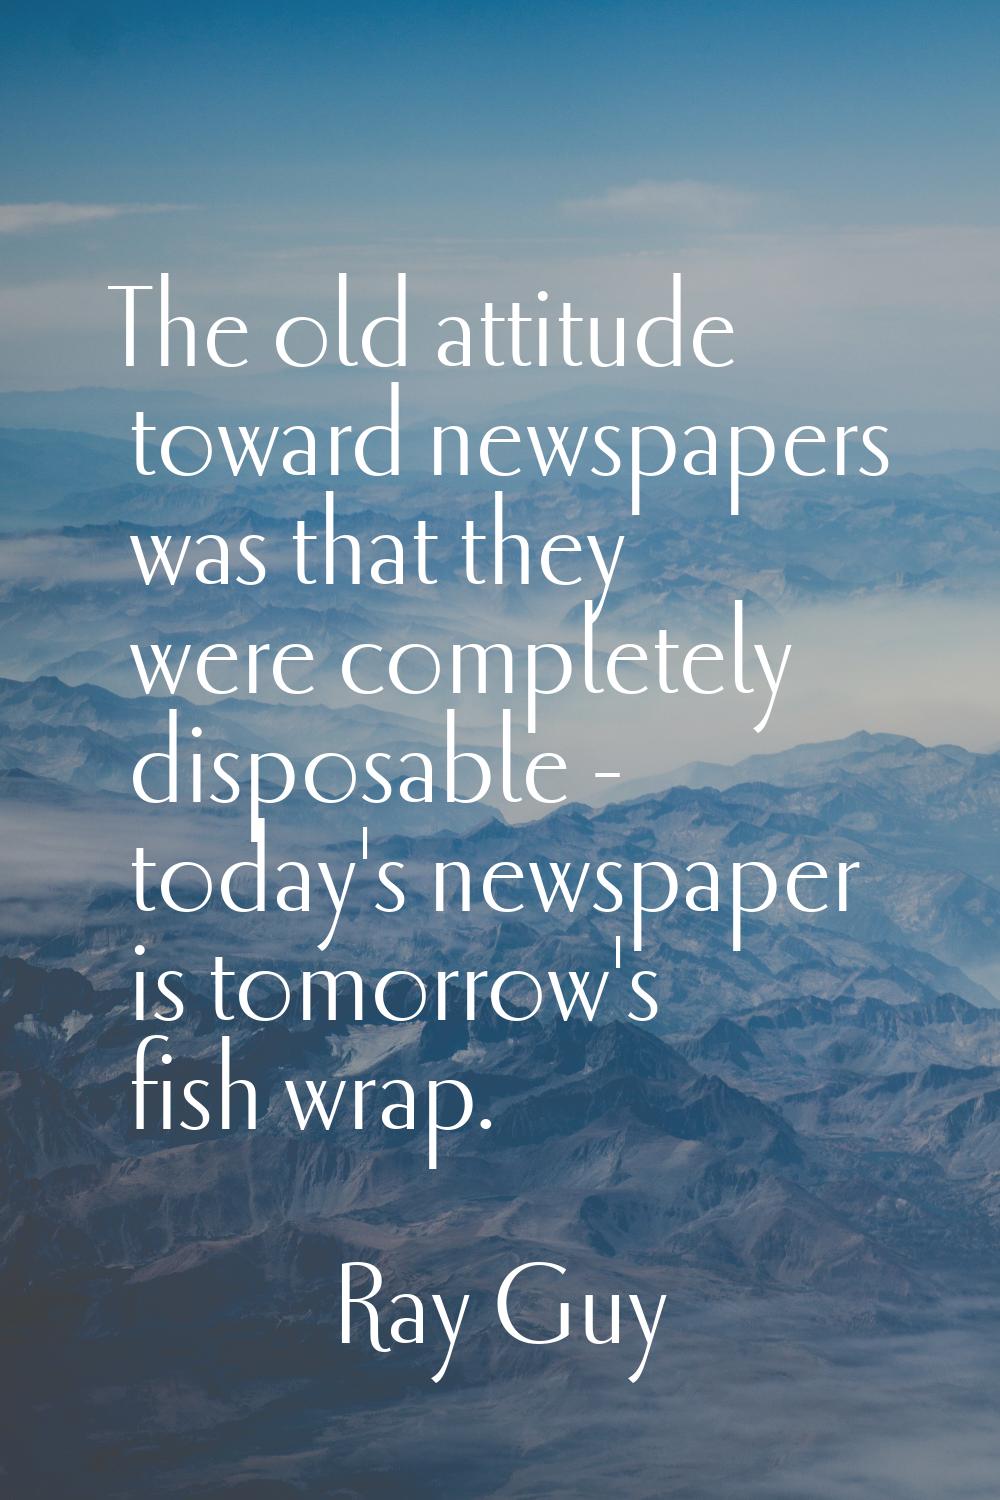 The old attitude toward newspapers was that they were completely disposable - today's newspaper is 